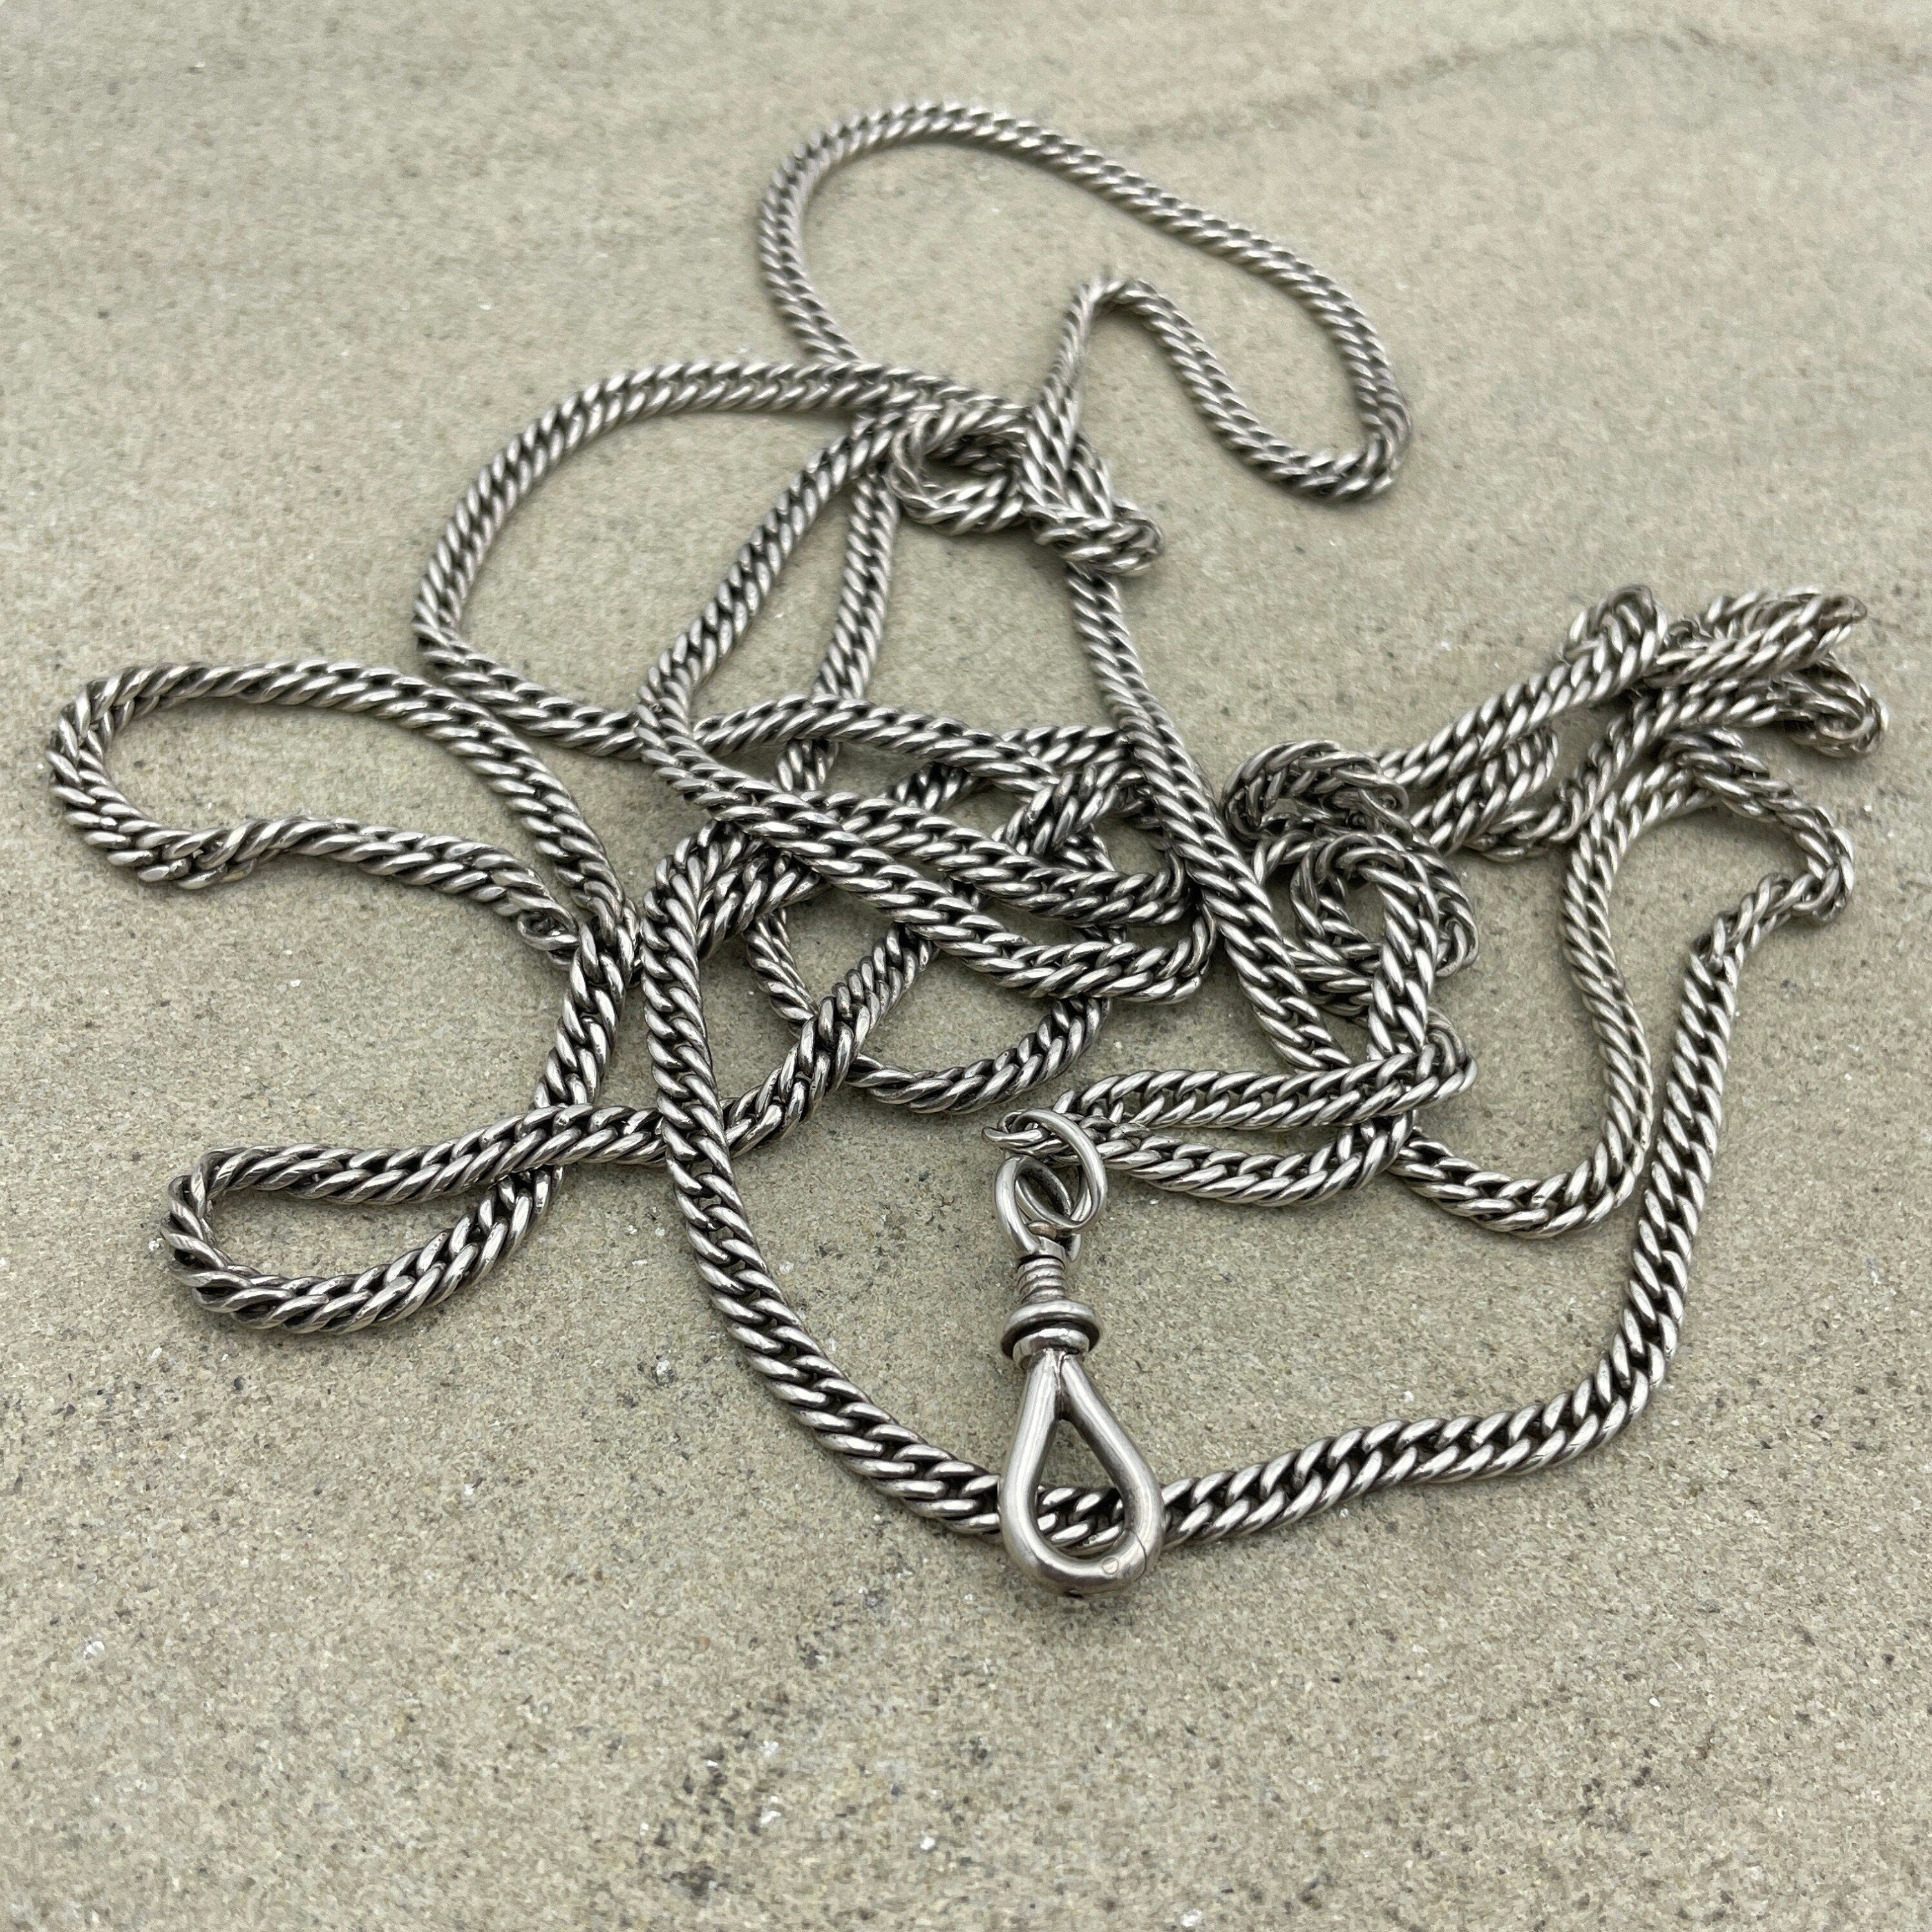 Antique curb link sterling silver guard chain, with swivel dog clip